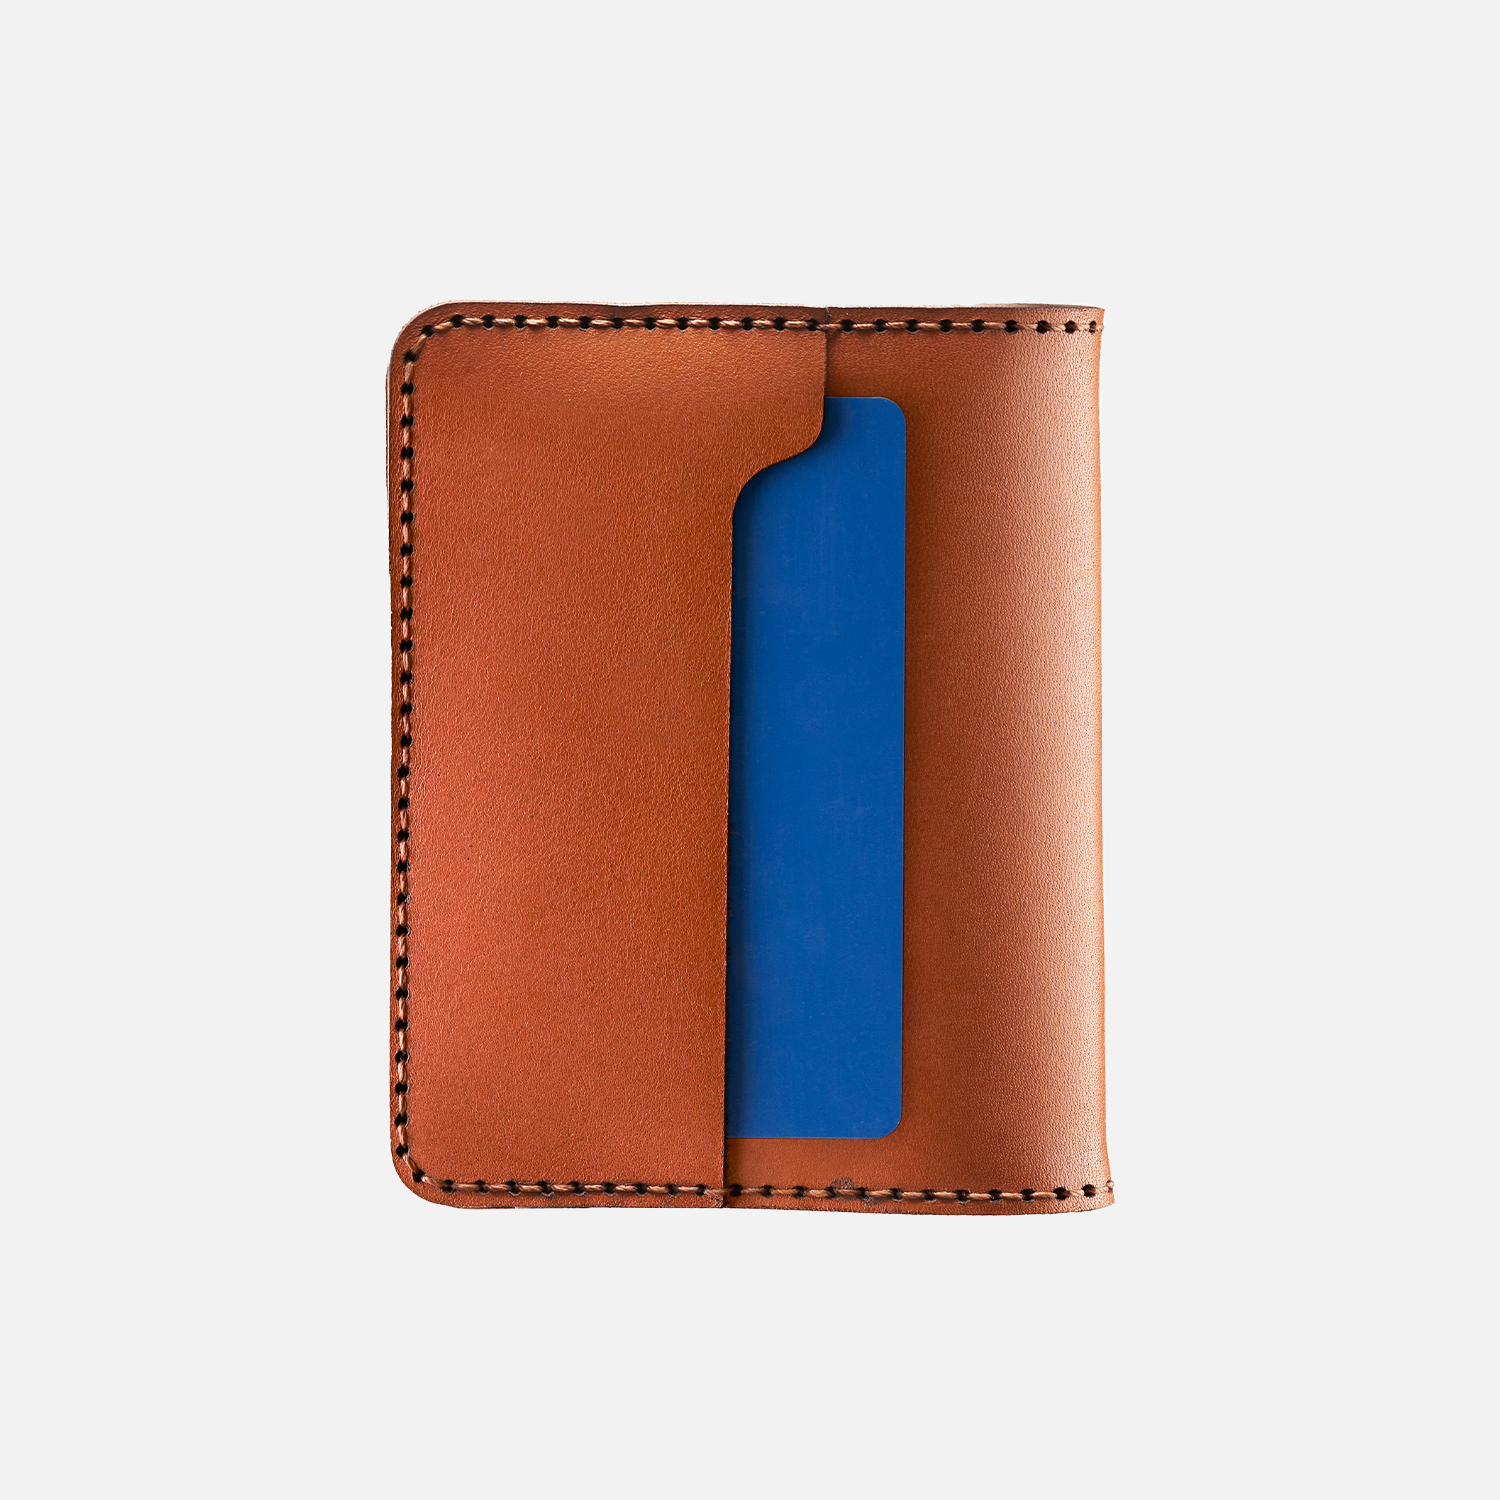 Brown leather bifold wallet with blue card insert isolated on white background.